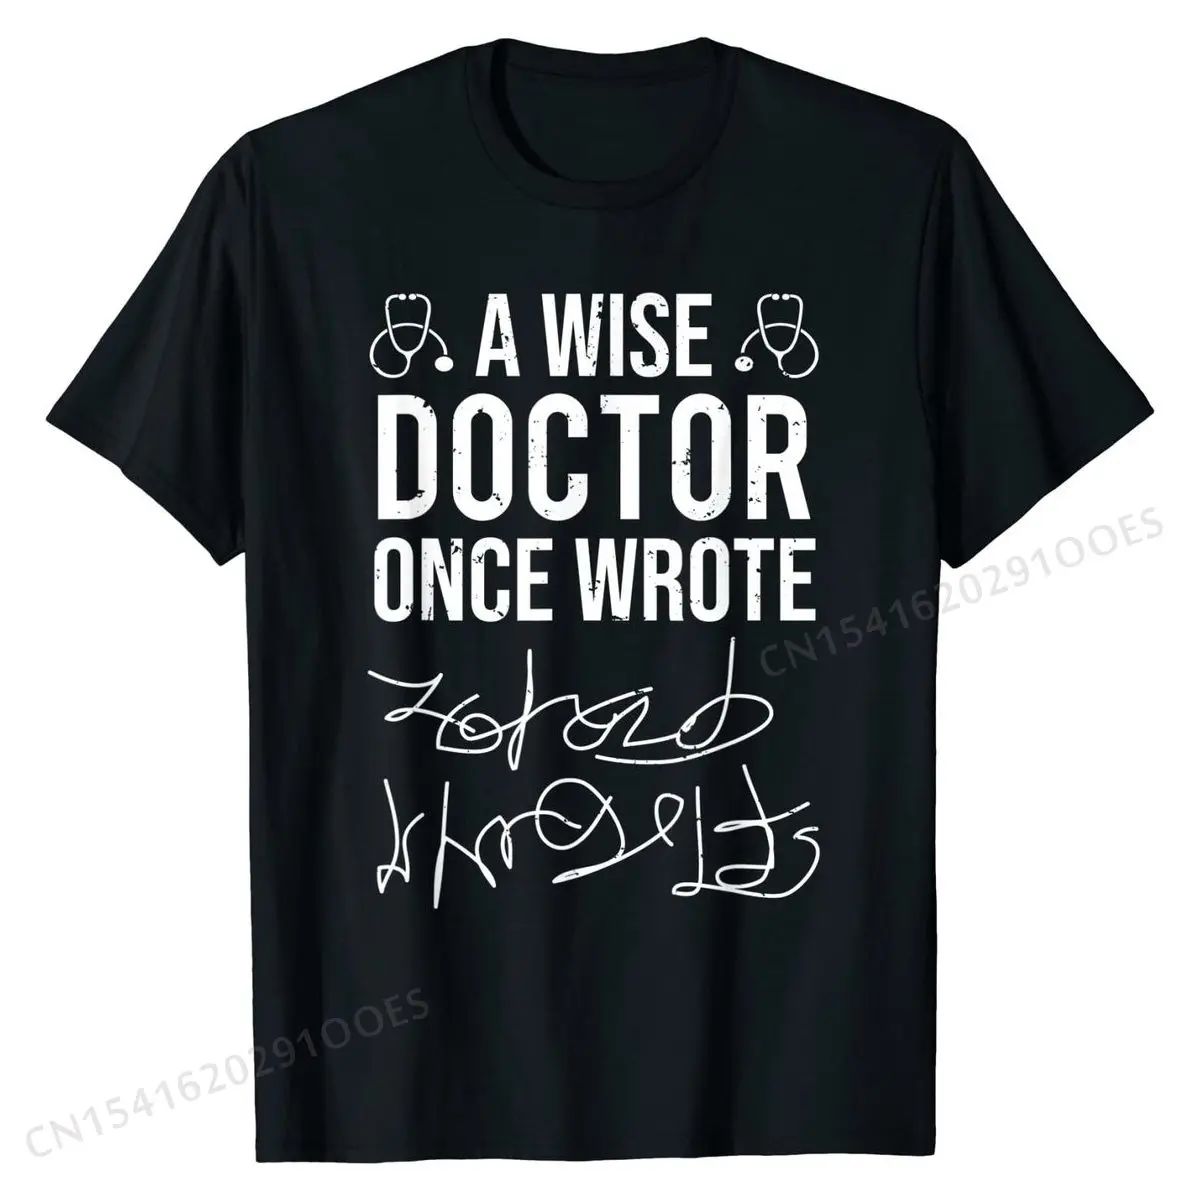 

A Wise Doctor Once Wrote Medical Doctor Handwriting Funny T-Shirt Top T-shirts Tops & Tees Newest Cotton Classic Birthday Men